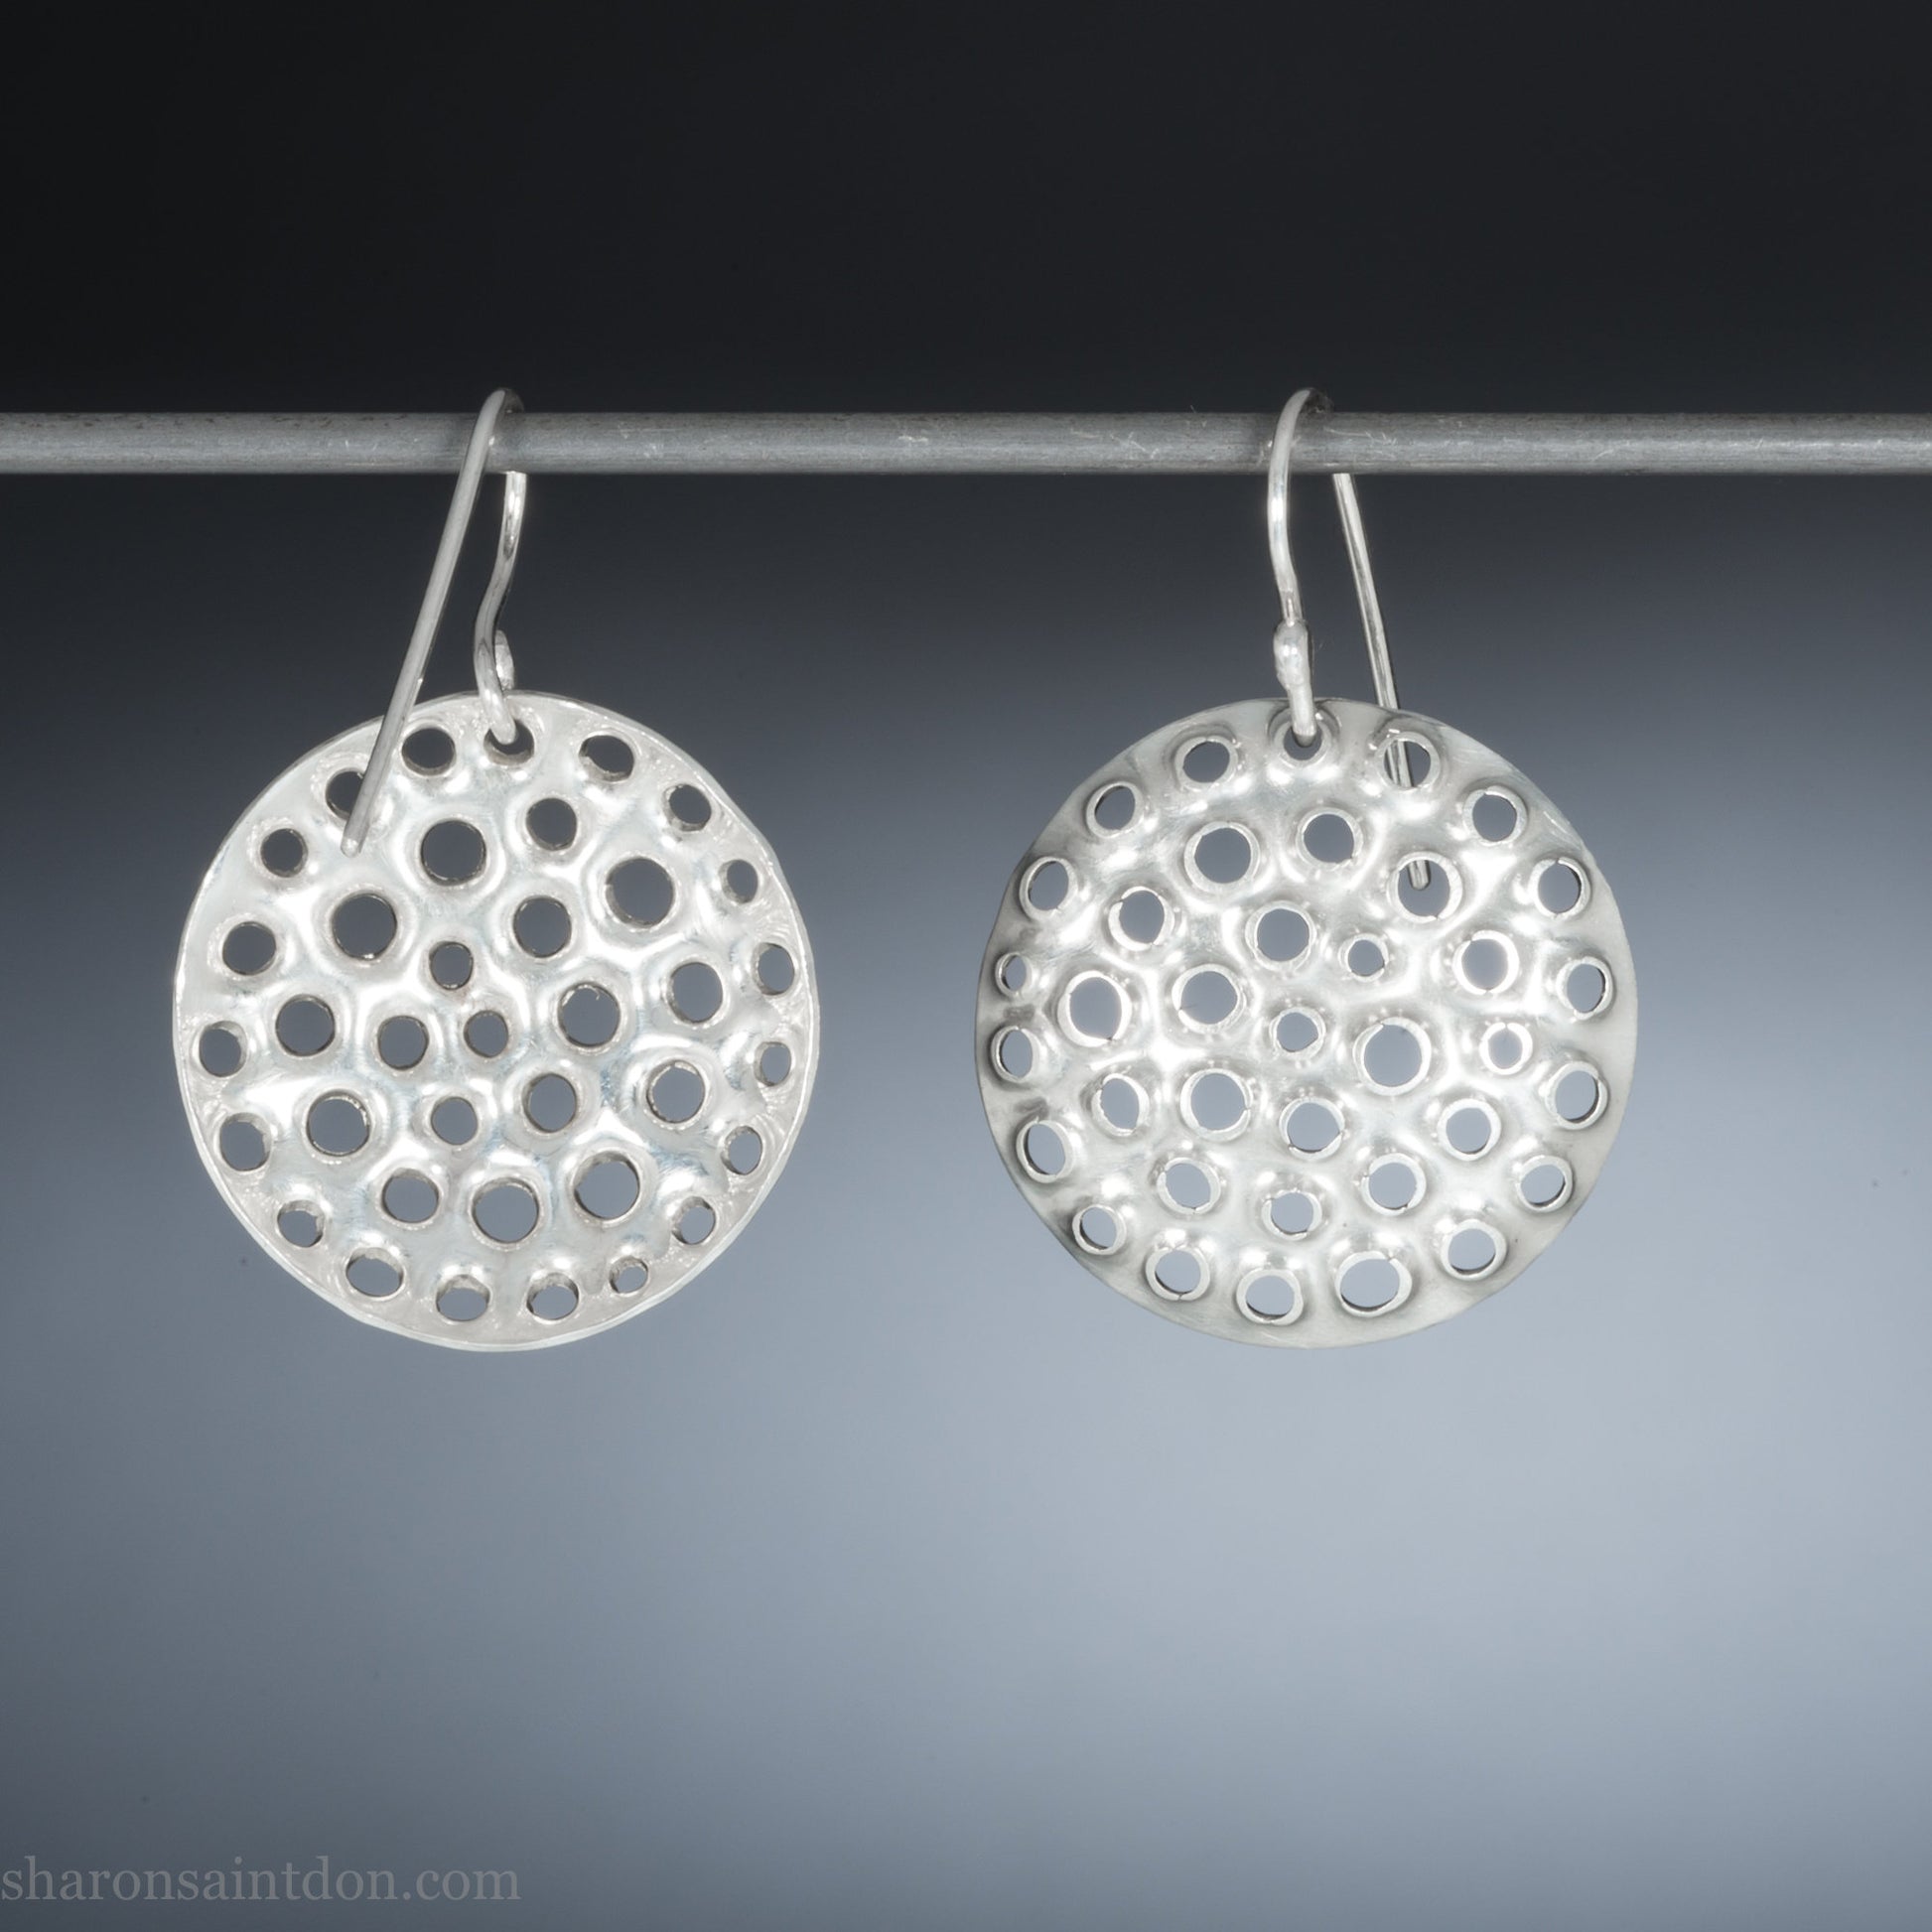 Handmade 925 sterling silver earrings for women. Round disc earrings with perforated holes made by Sharon SaintDon in North America. 25mm diameter.